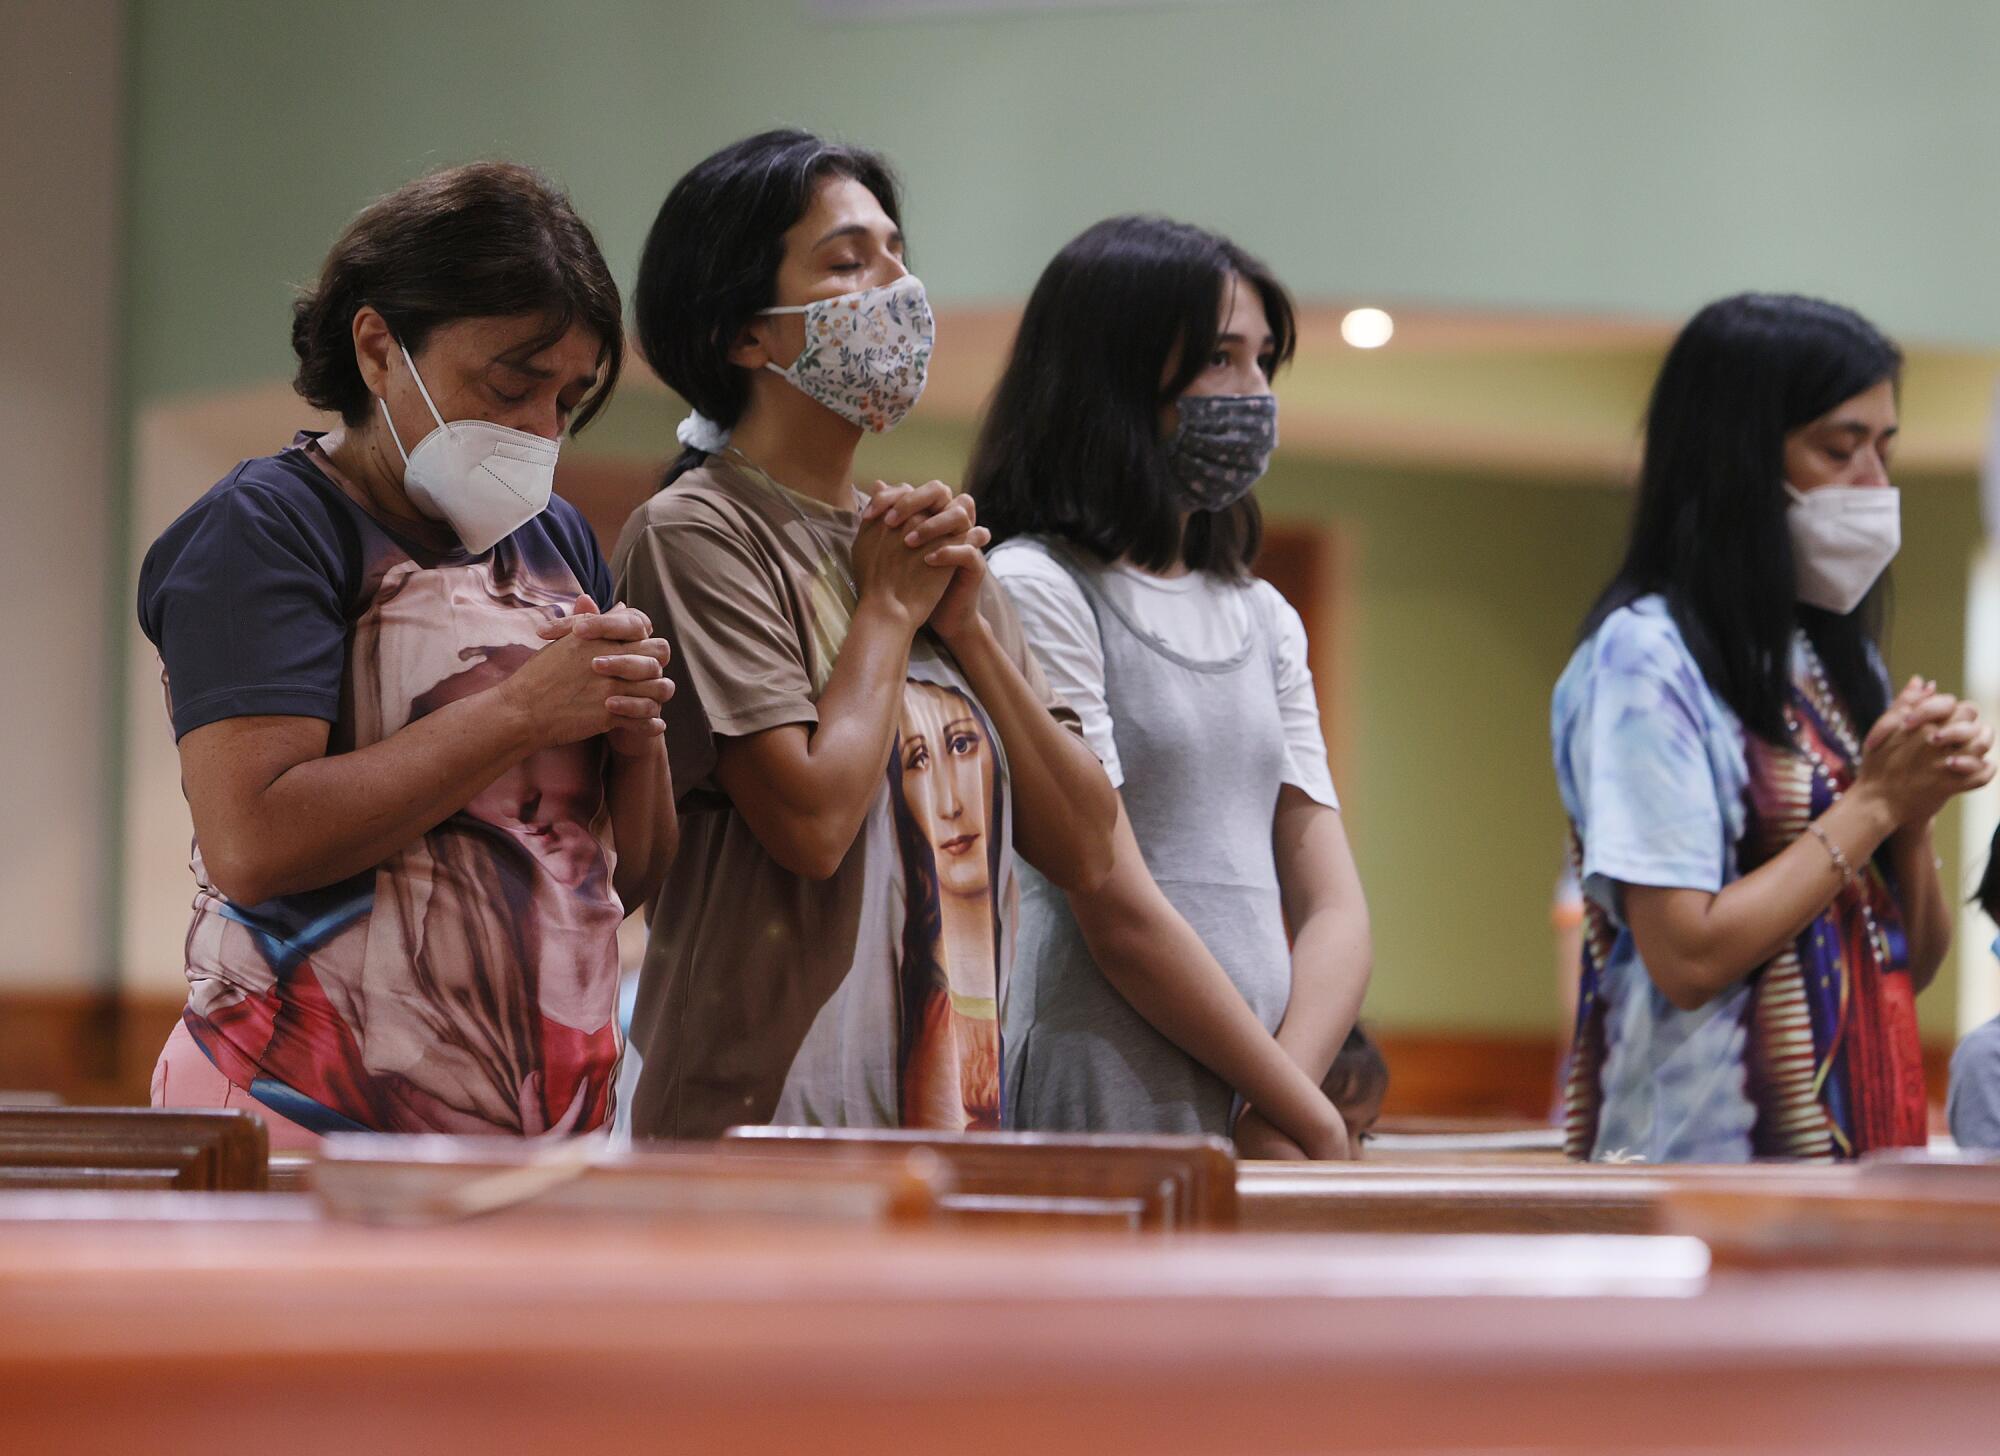 Women and girls in masks stand and pray inside a church.